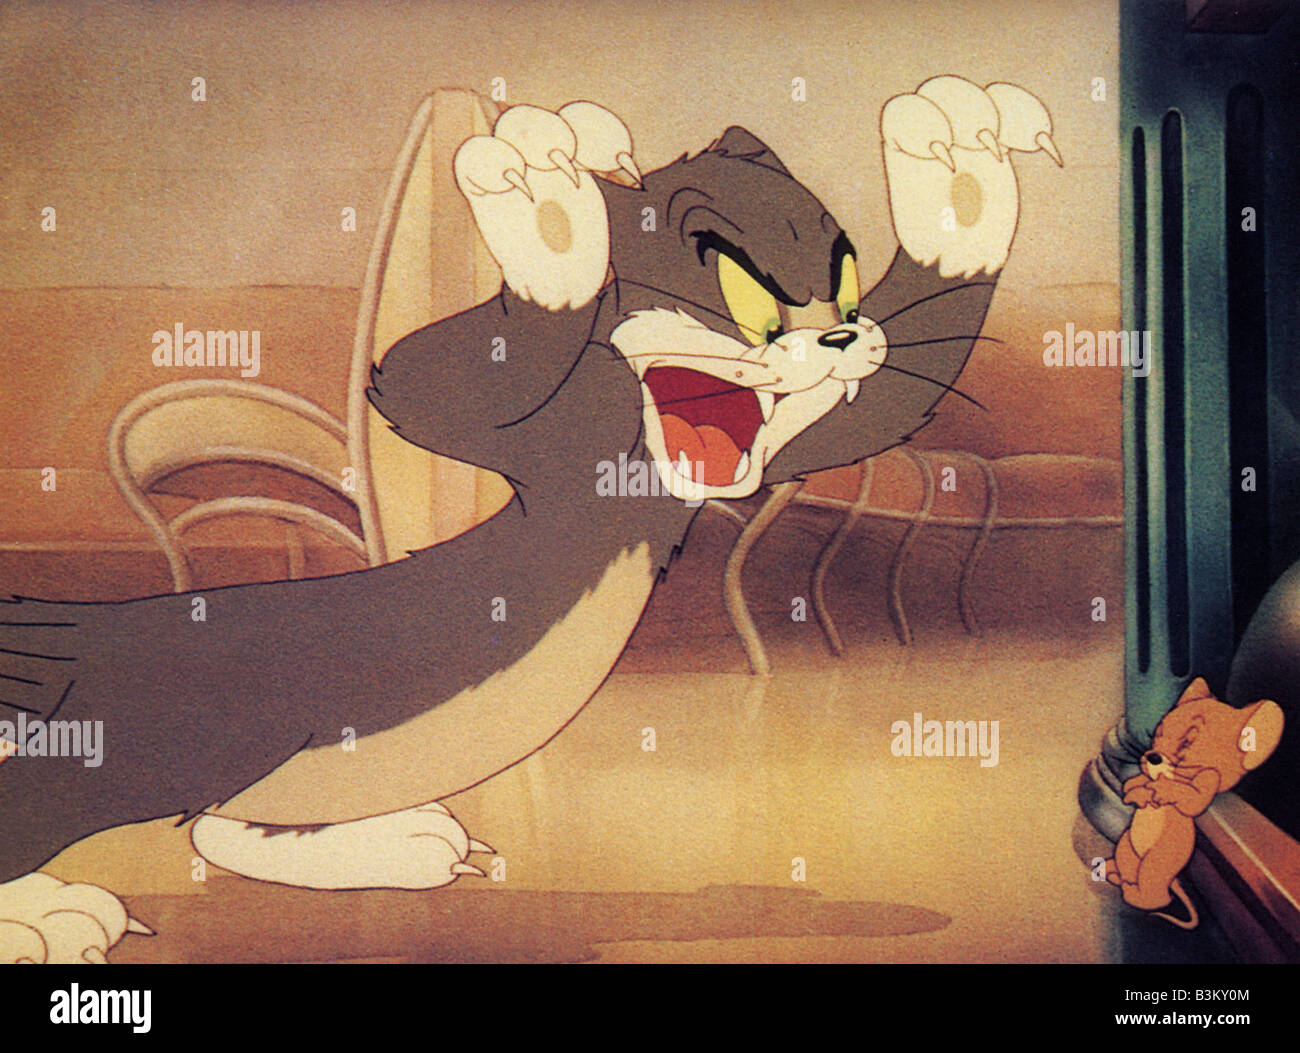 MOUSE IN THE HOUSE Warner Cartoon mit Tom und Jerry Stockfoto